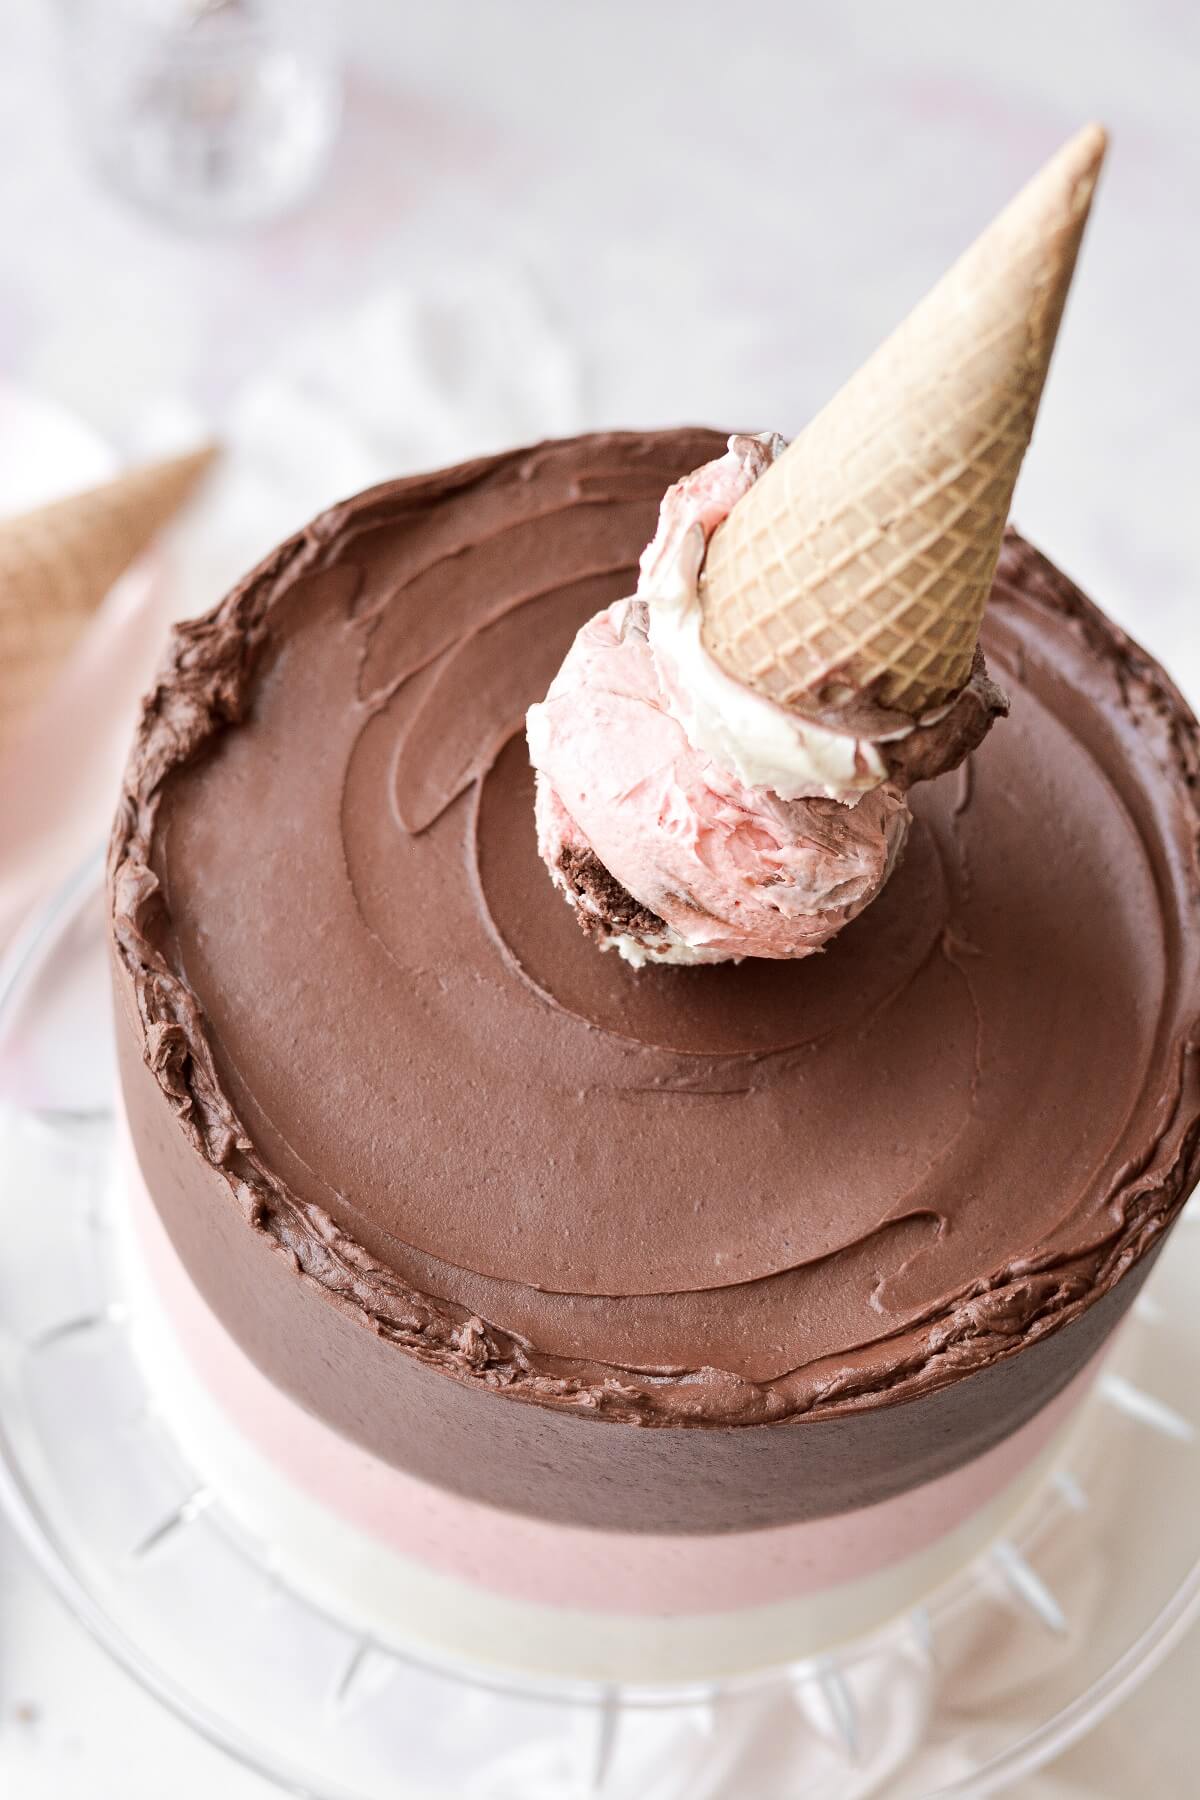 An ice cream cone sitting on top of a neapolitan cake.